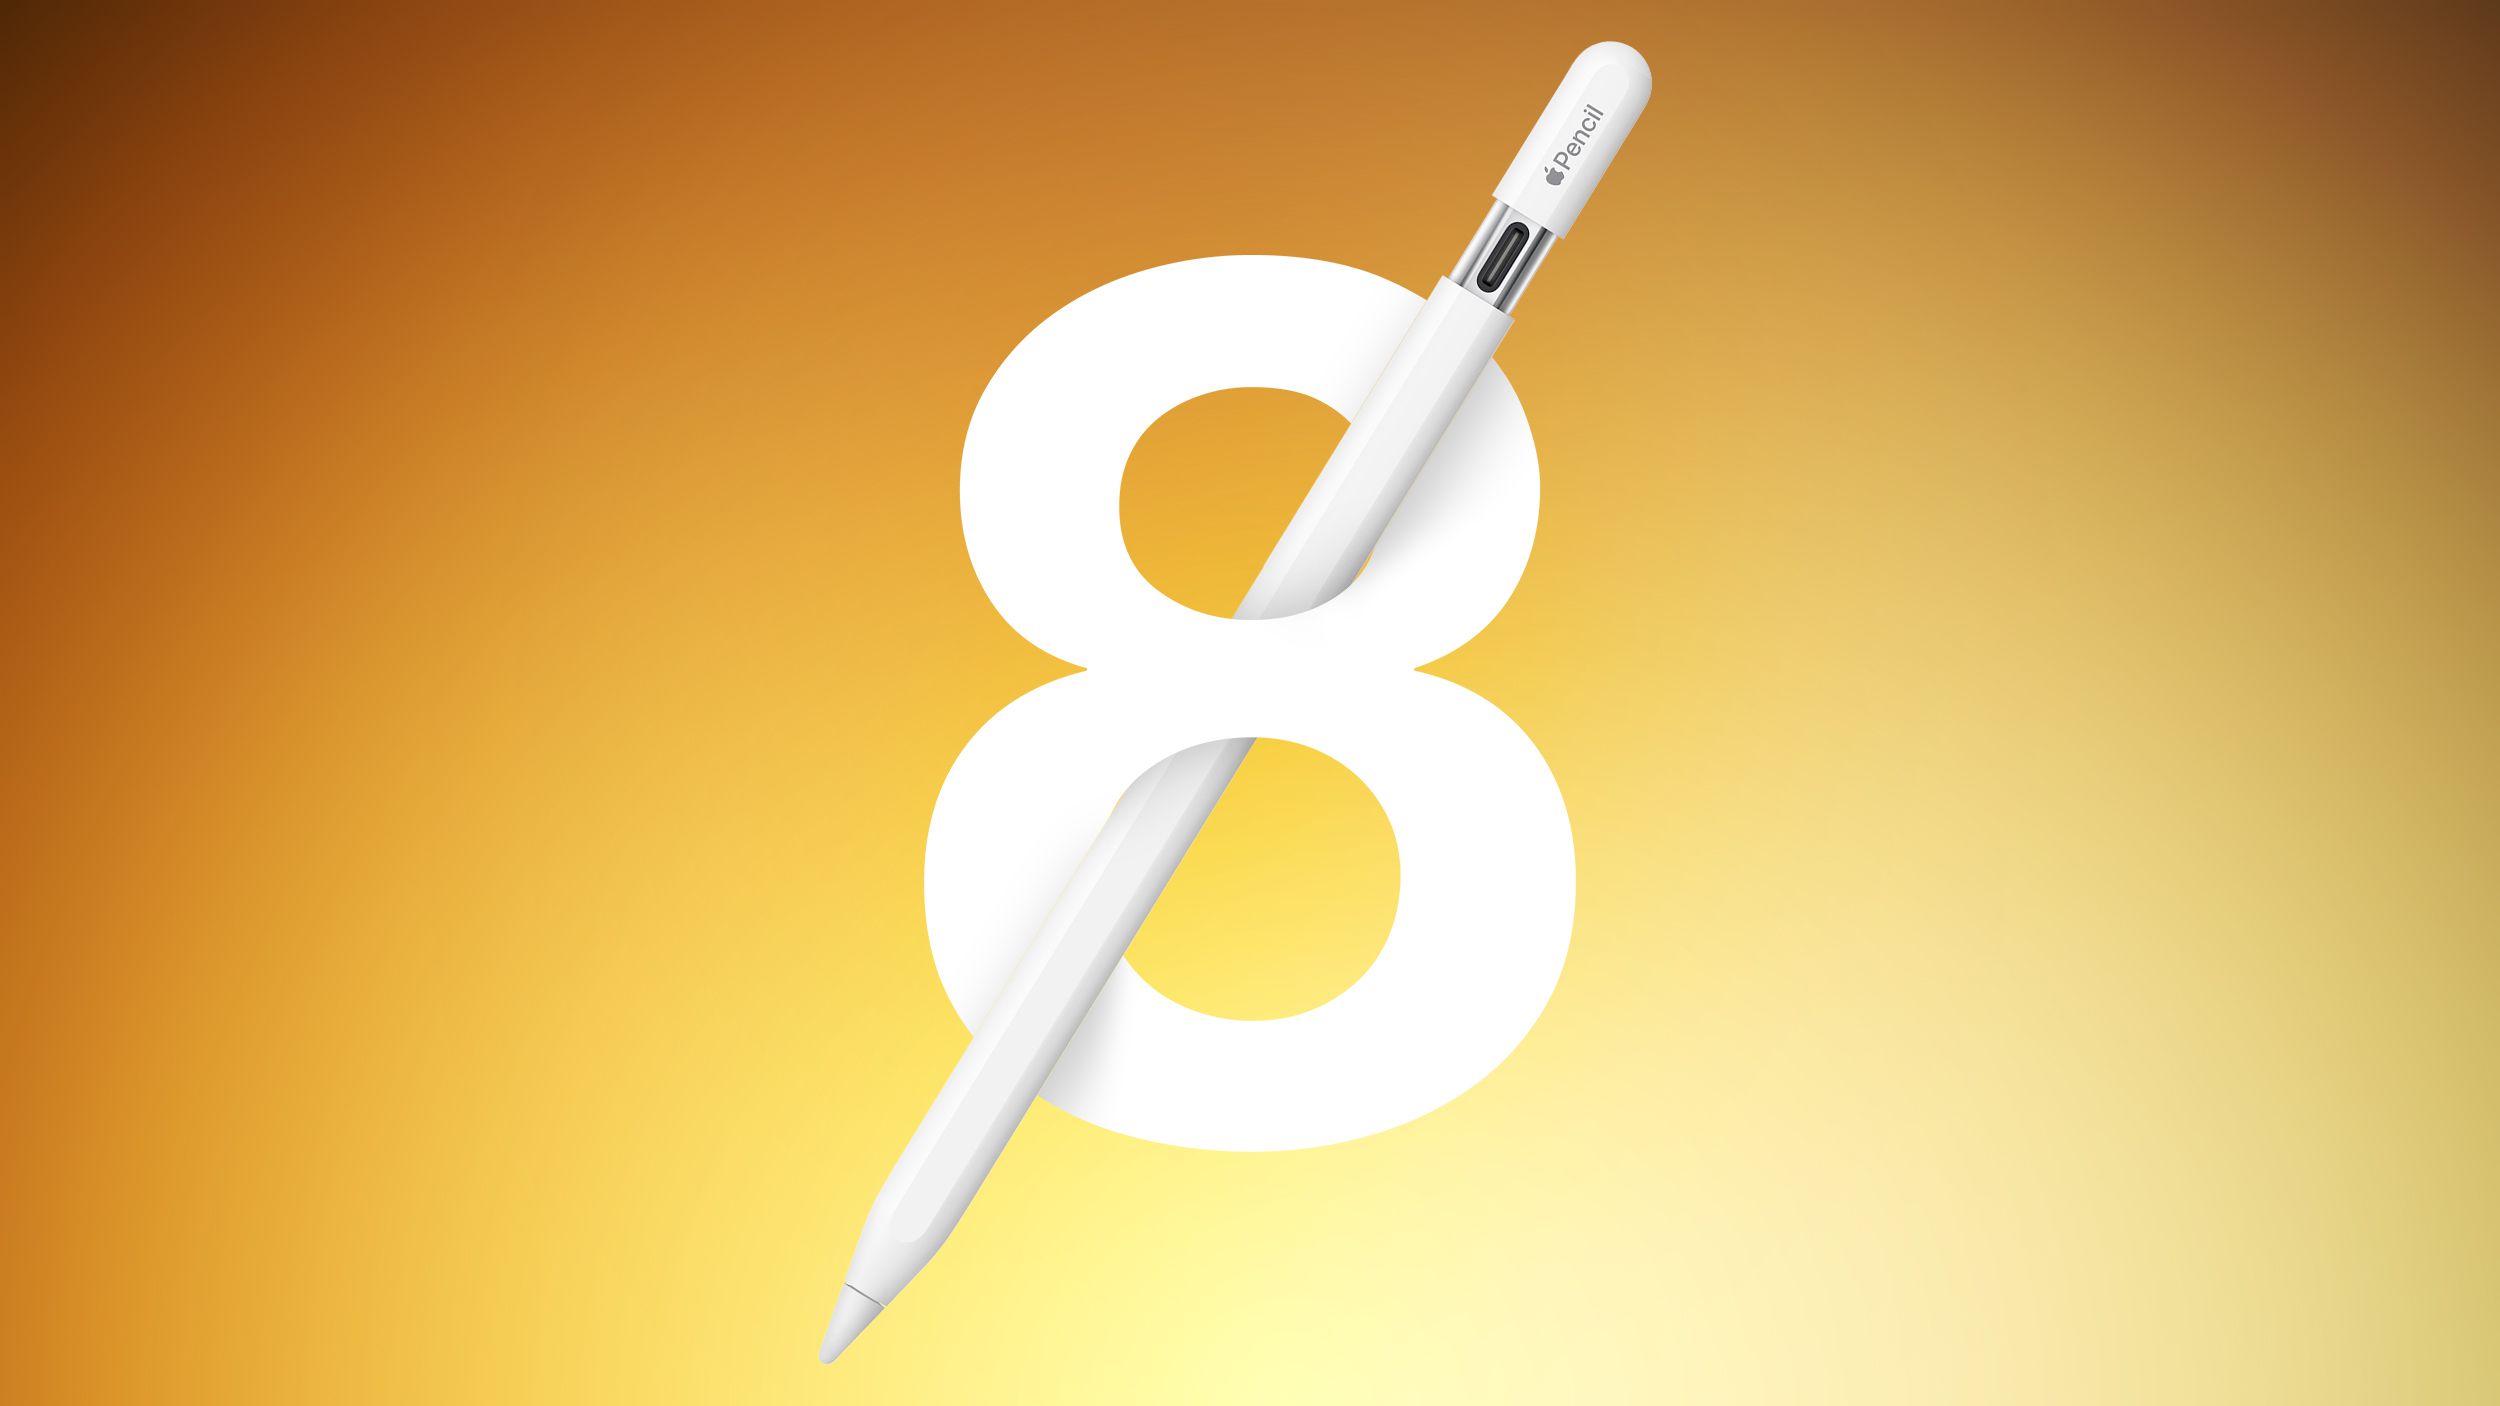 Apple introduces new Apple Pencil, bringing more value and choice